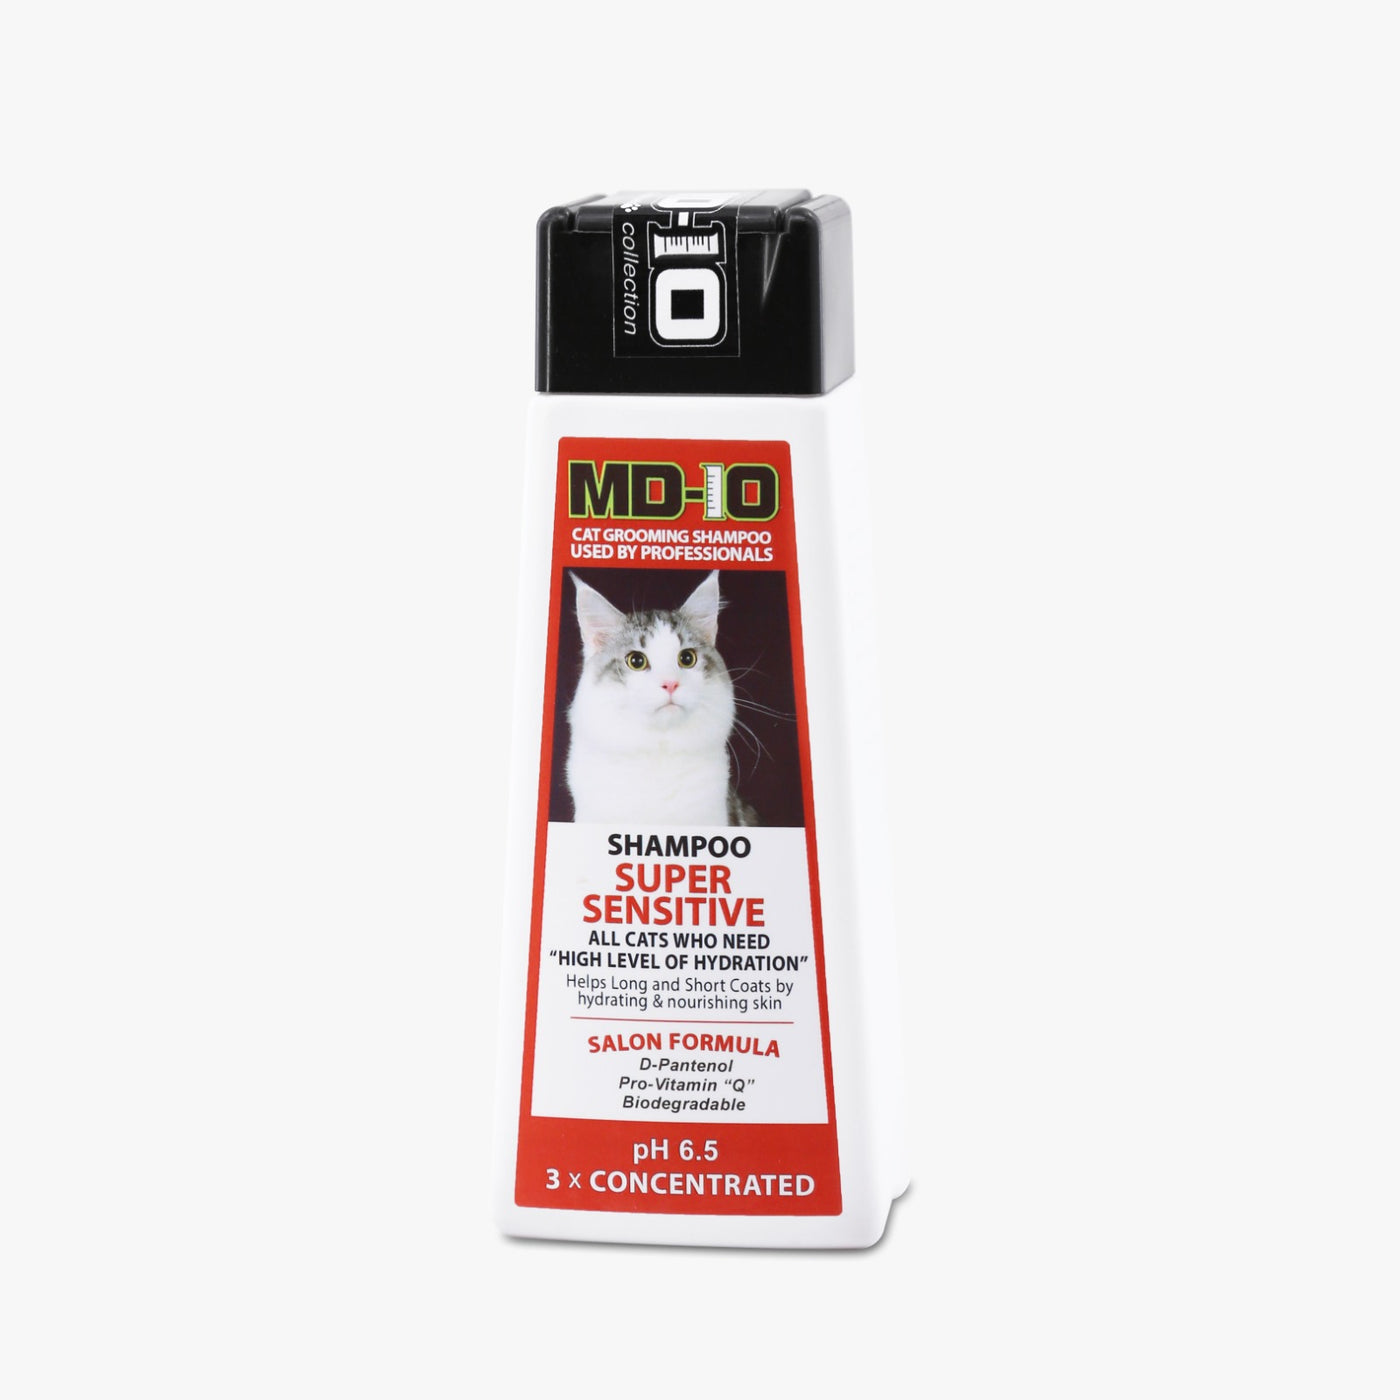 MD-10 Professional Grooming- Super Sensitive Shampoo (For Cat)